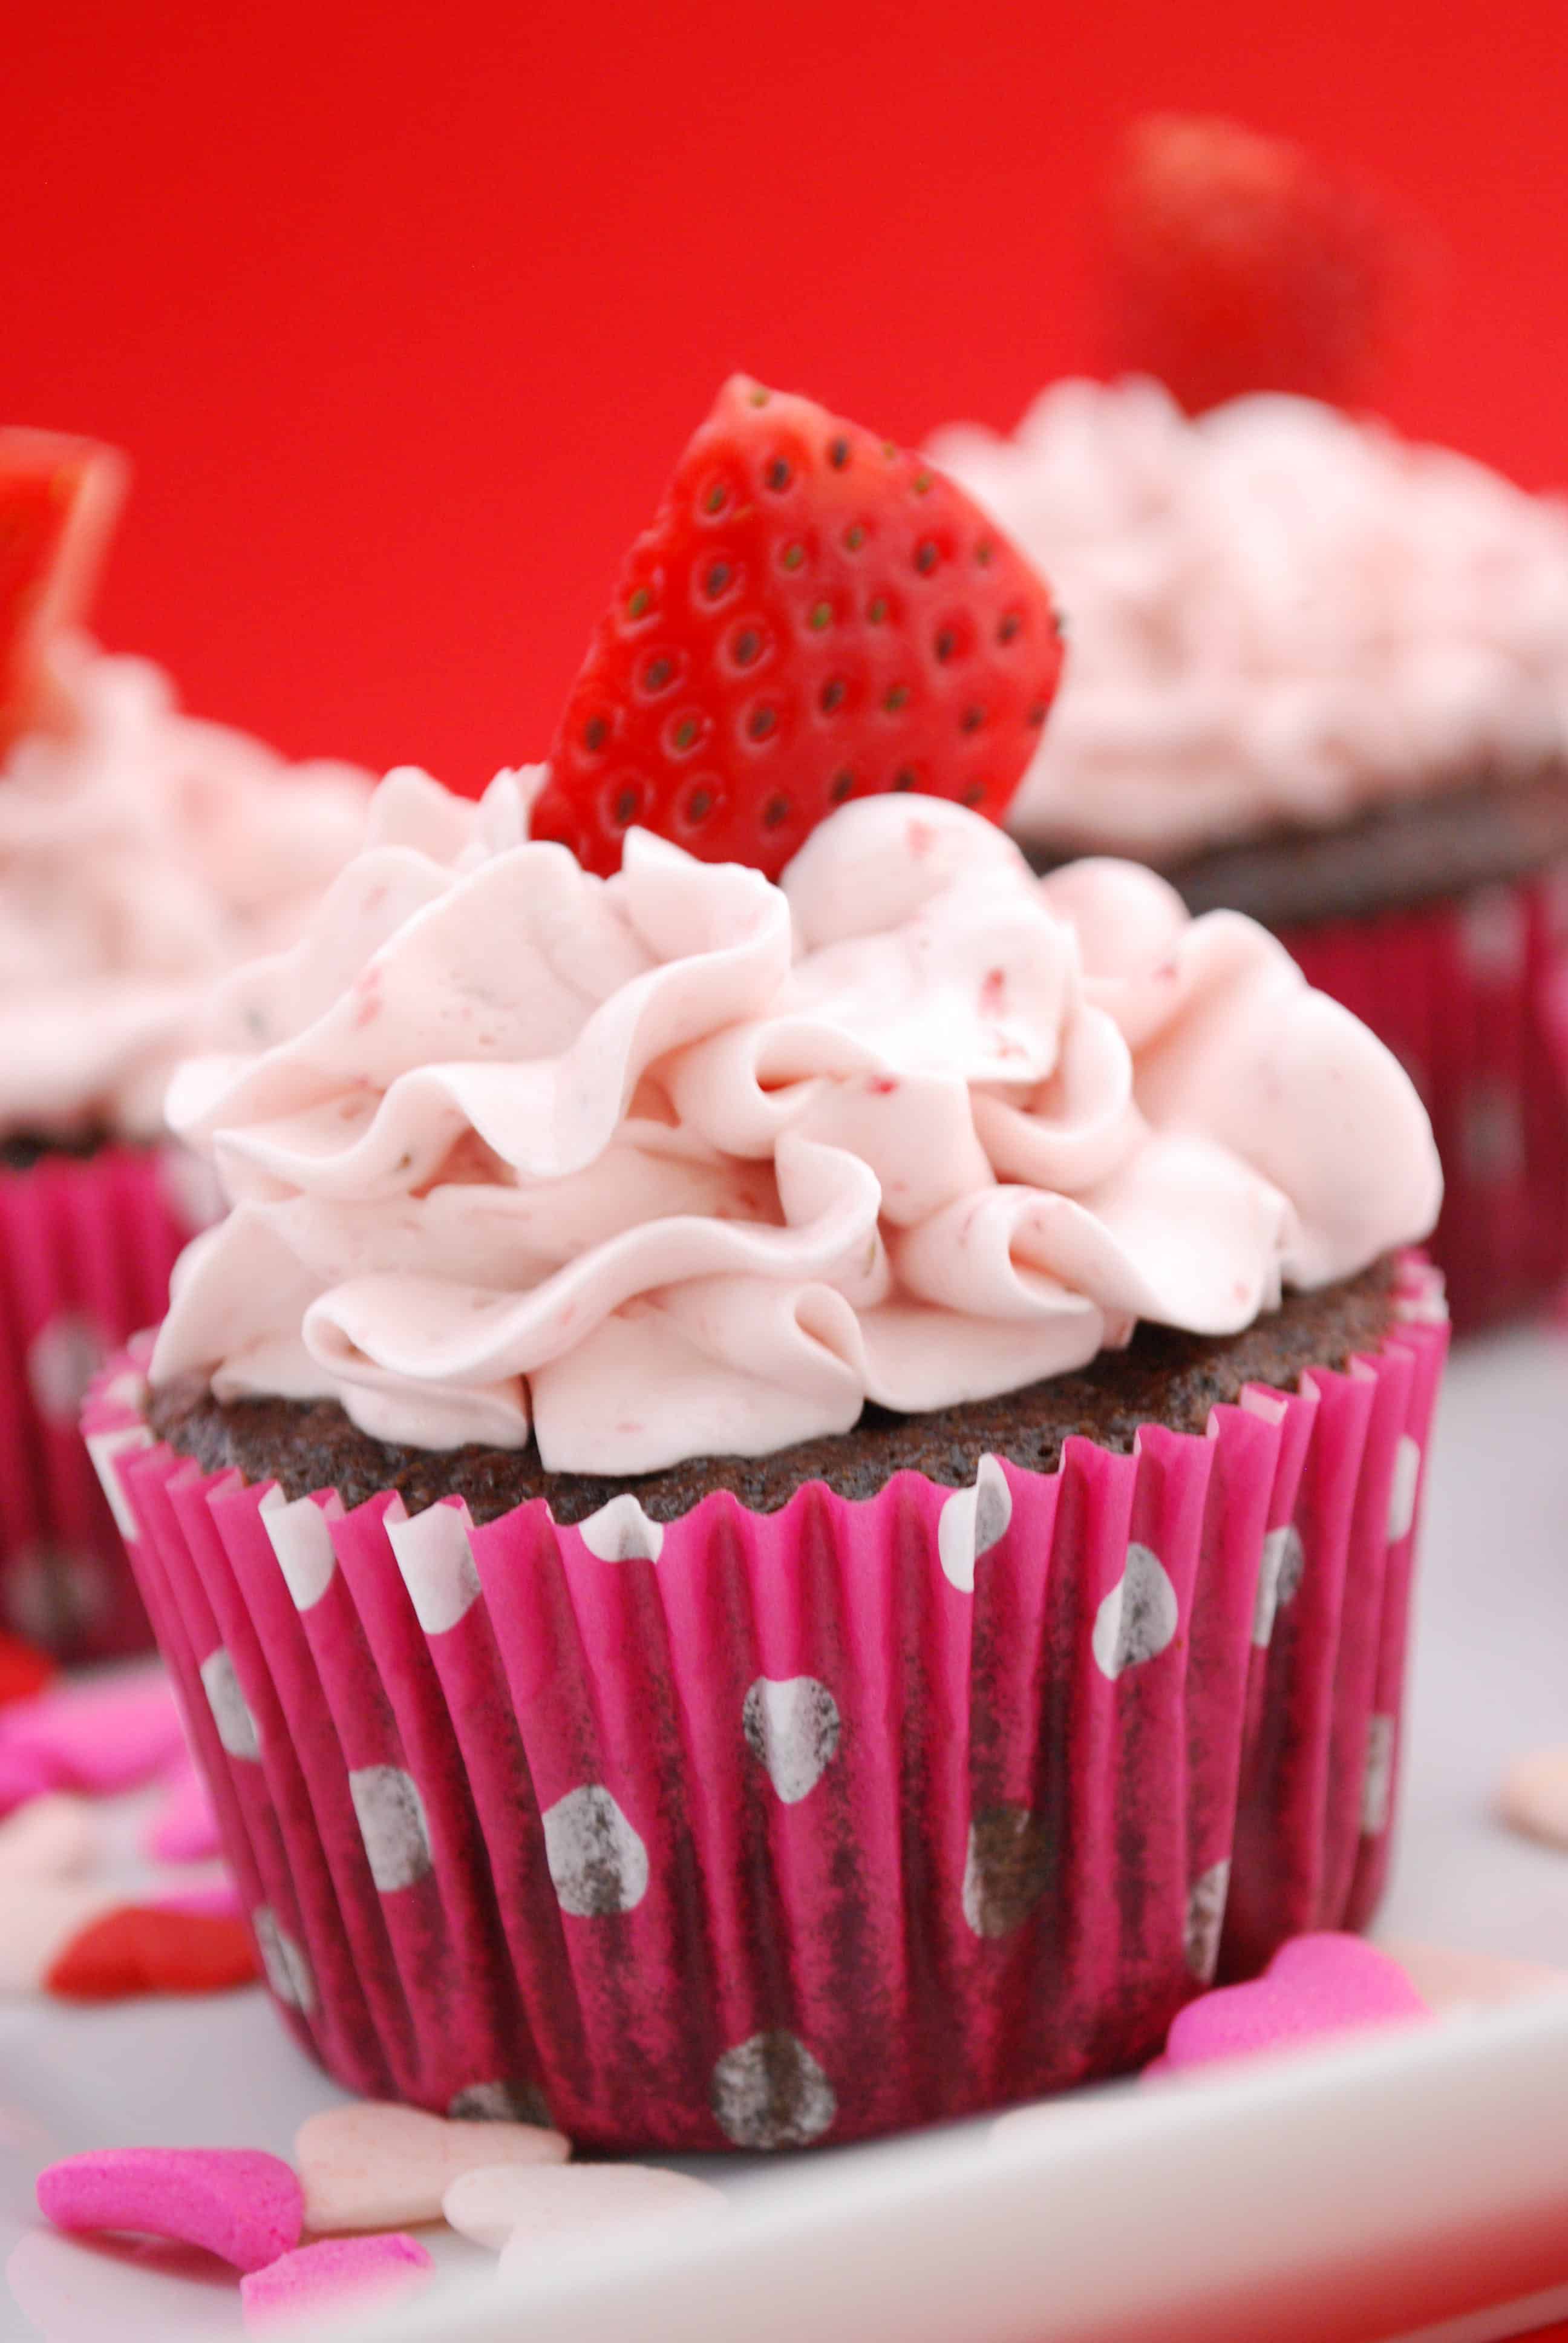 Chocolate and strawberry cupcakes